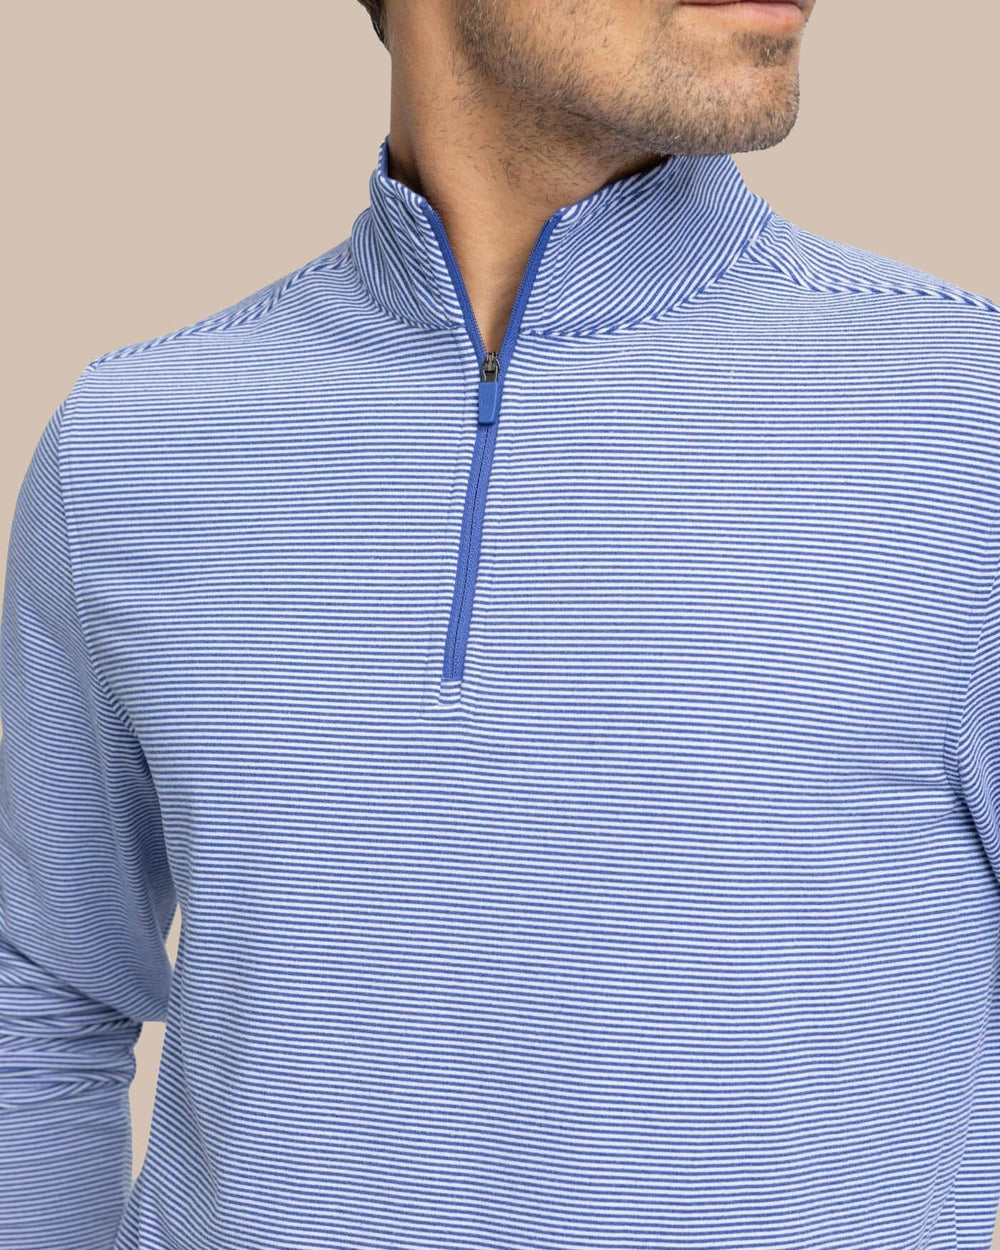 The detail view of the Southern Tide Cruiser Micro-Stripe Heather Quarter Zip by Southern Tide - Heather University Blue